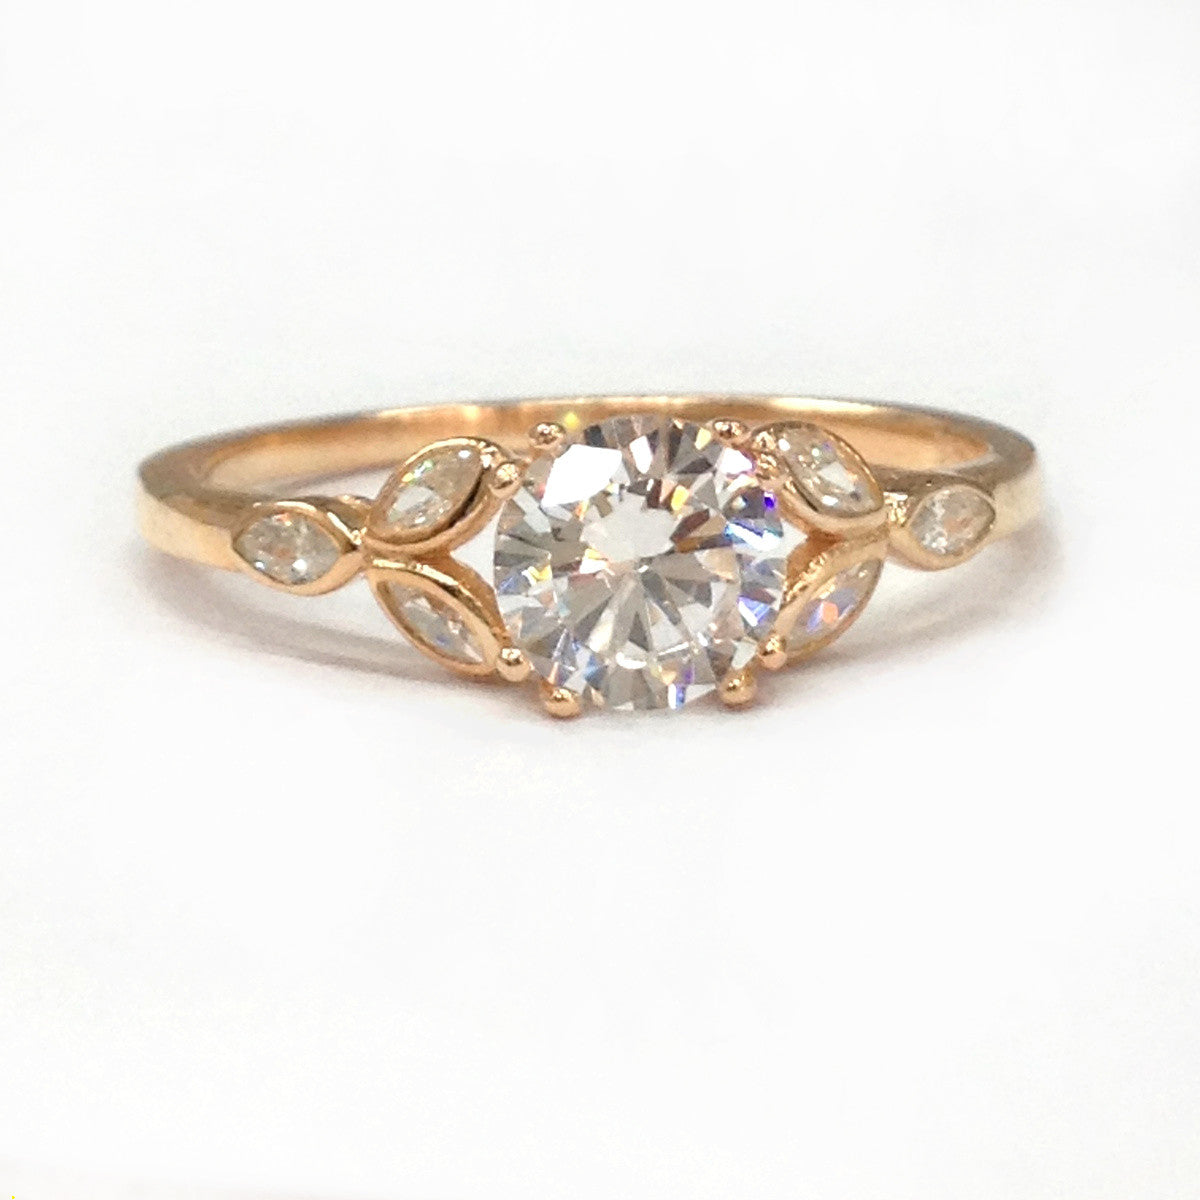 Reserved for AAA-Engagement Semi Mount Ring Marquise Diamond  14K Rose Gold 6.5mm Round